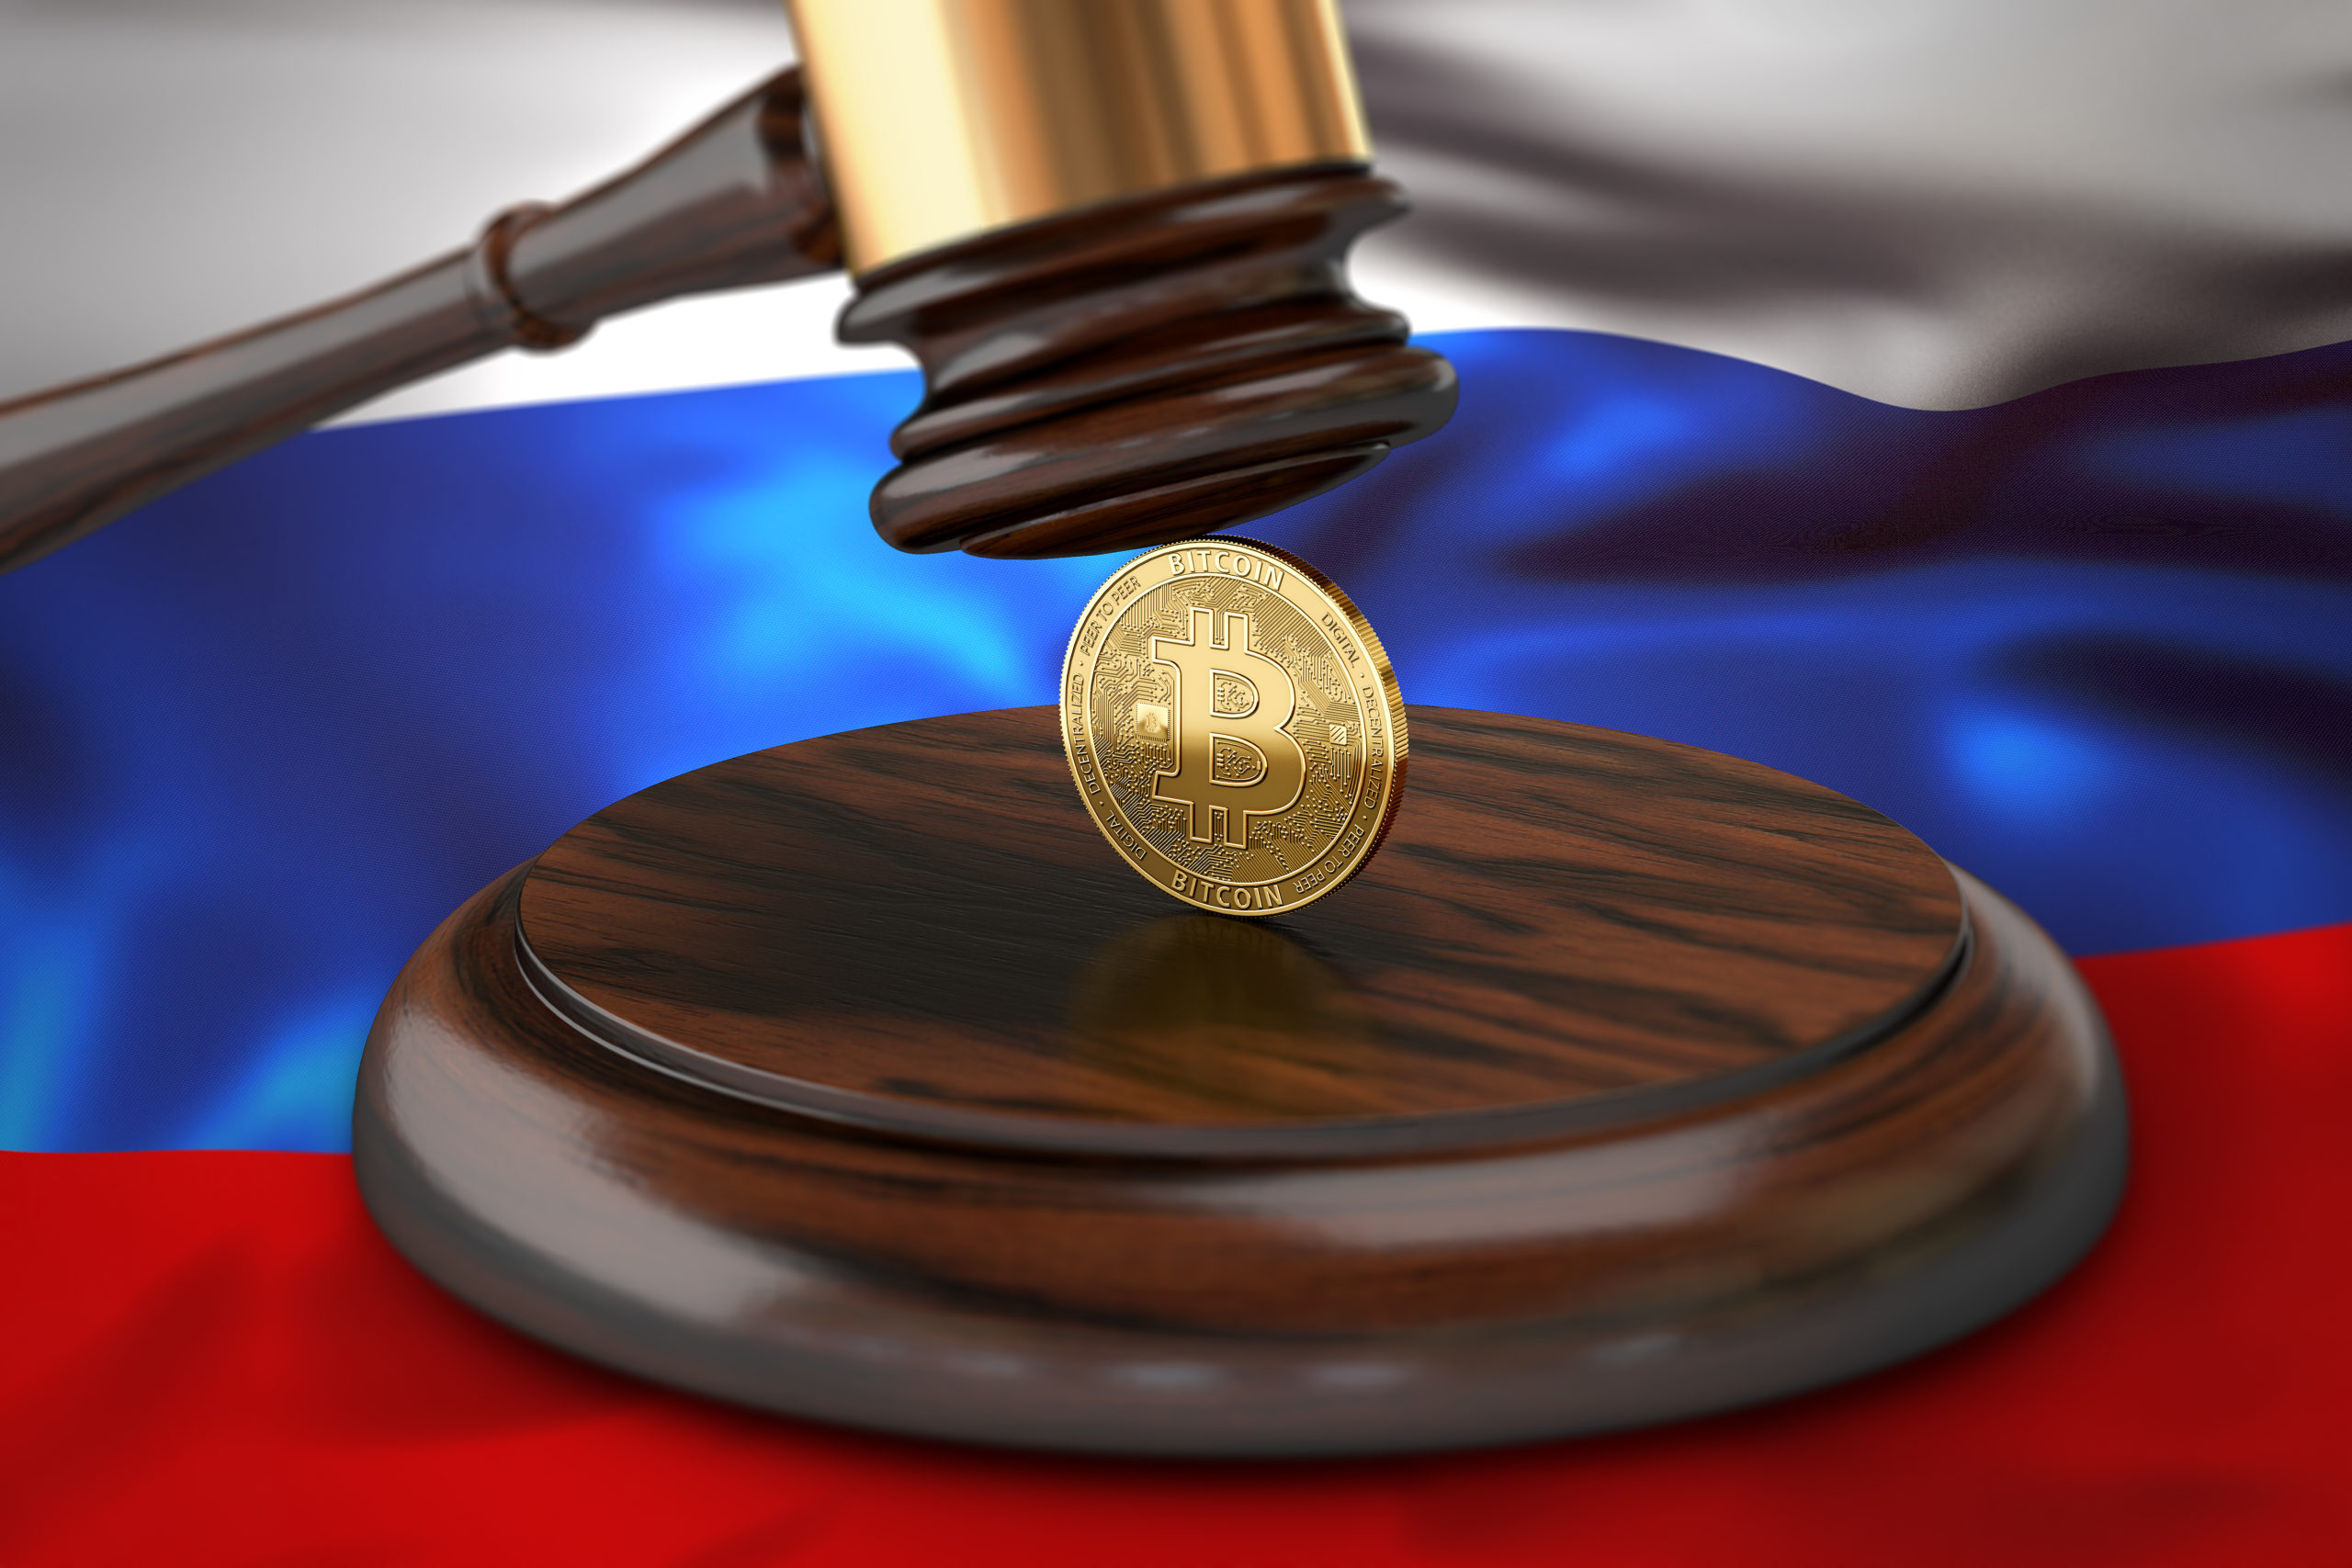 Here’s Why a Lawyer Thinks Russia’s Cryptocurrency Ban is Unconstitutional